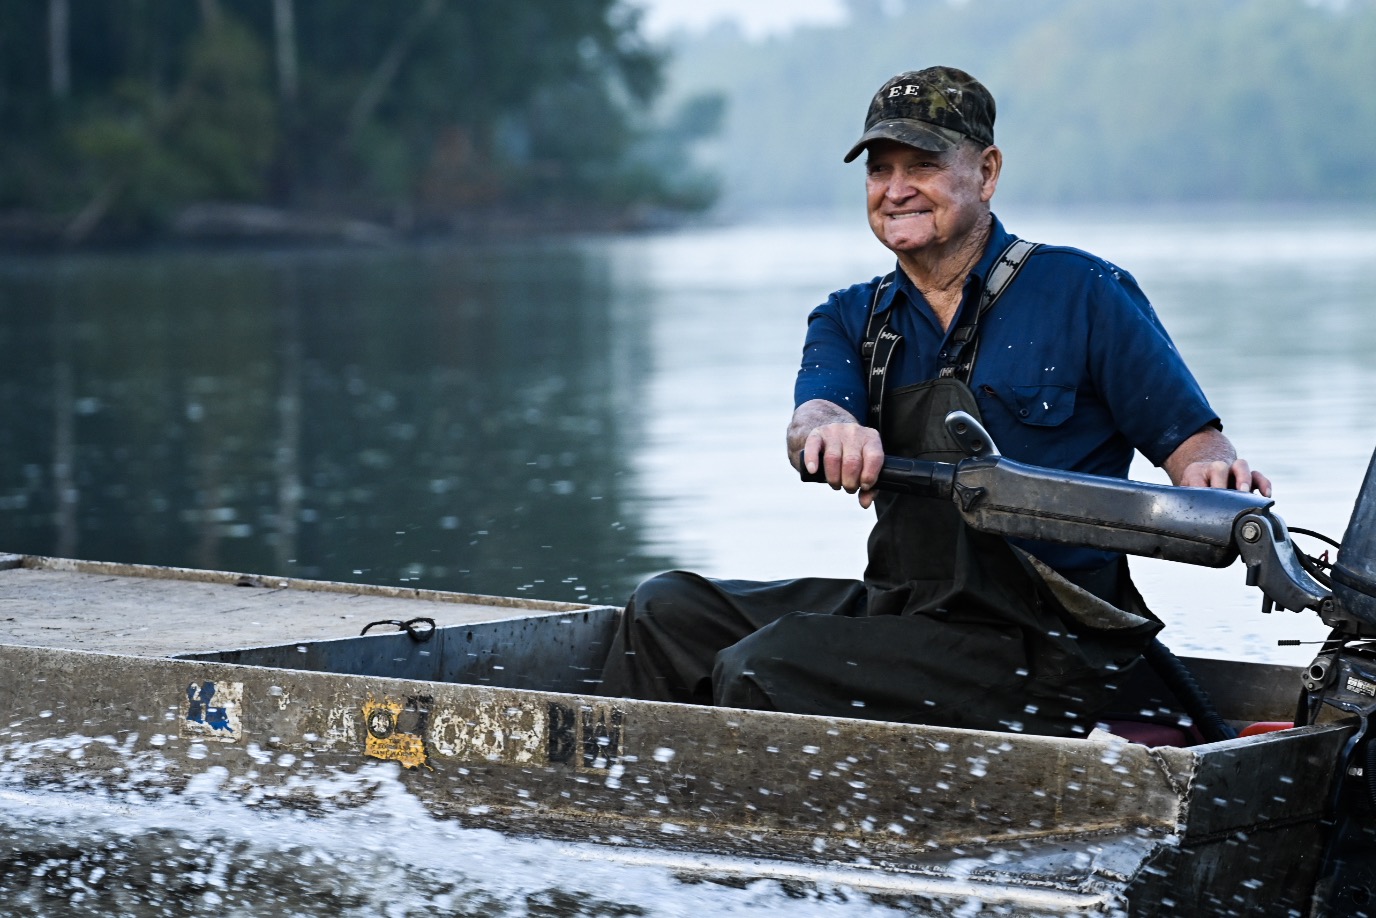 Wilven Hayes, 85, guiding his fishing boat down the Atchafalaya River